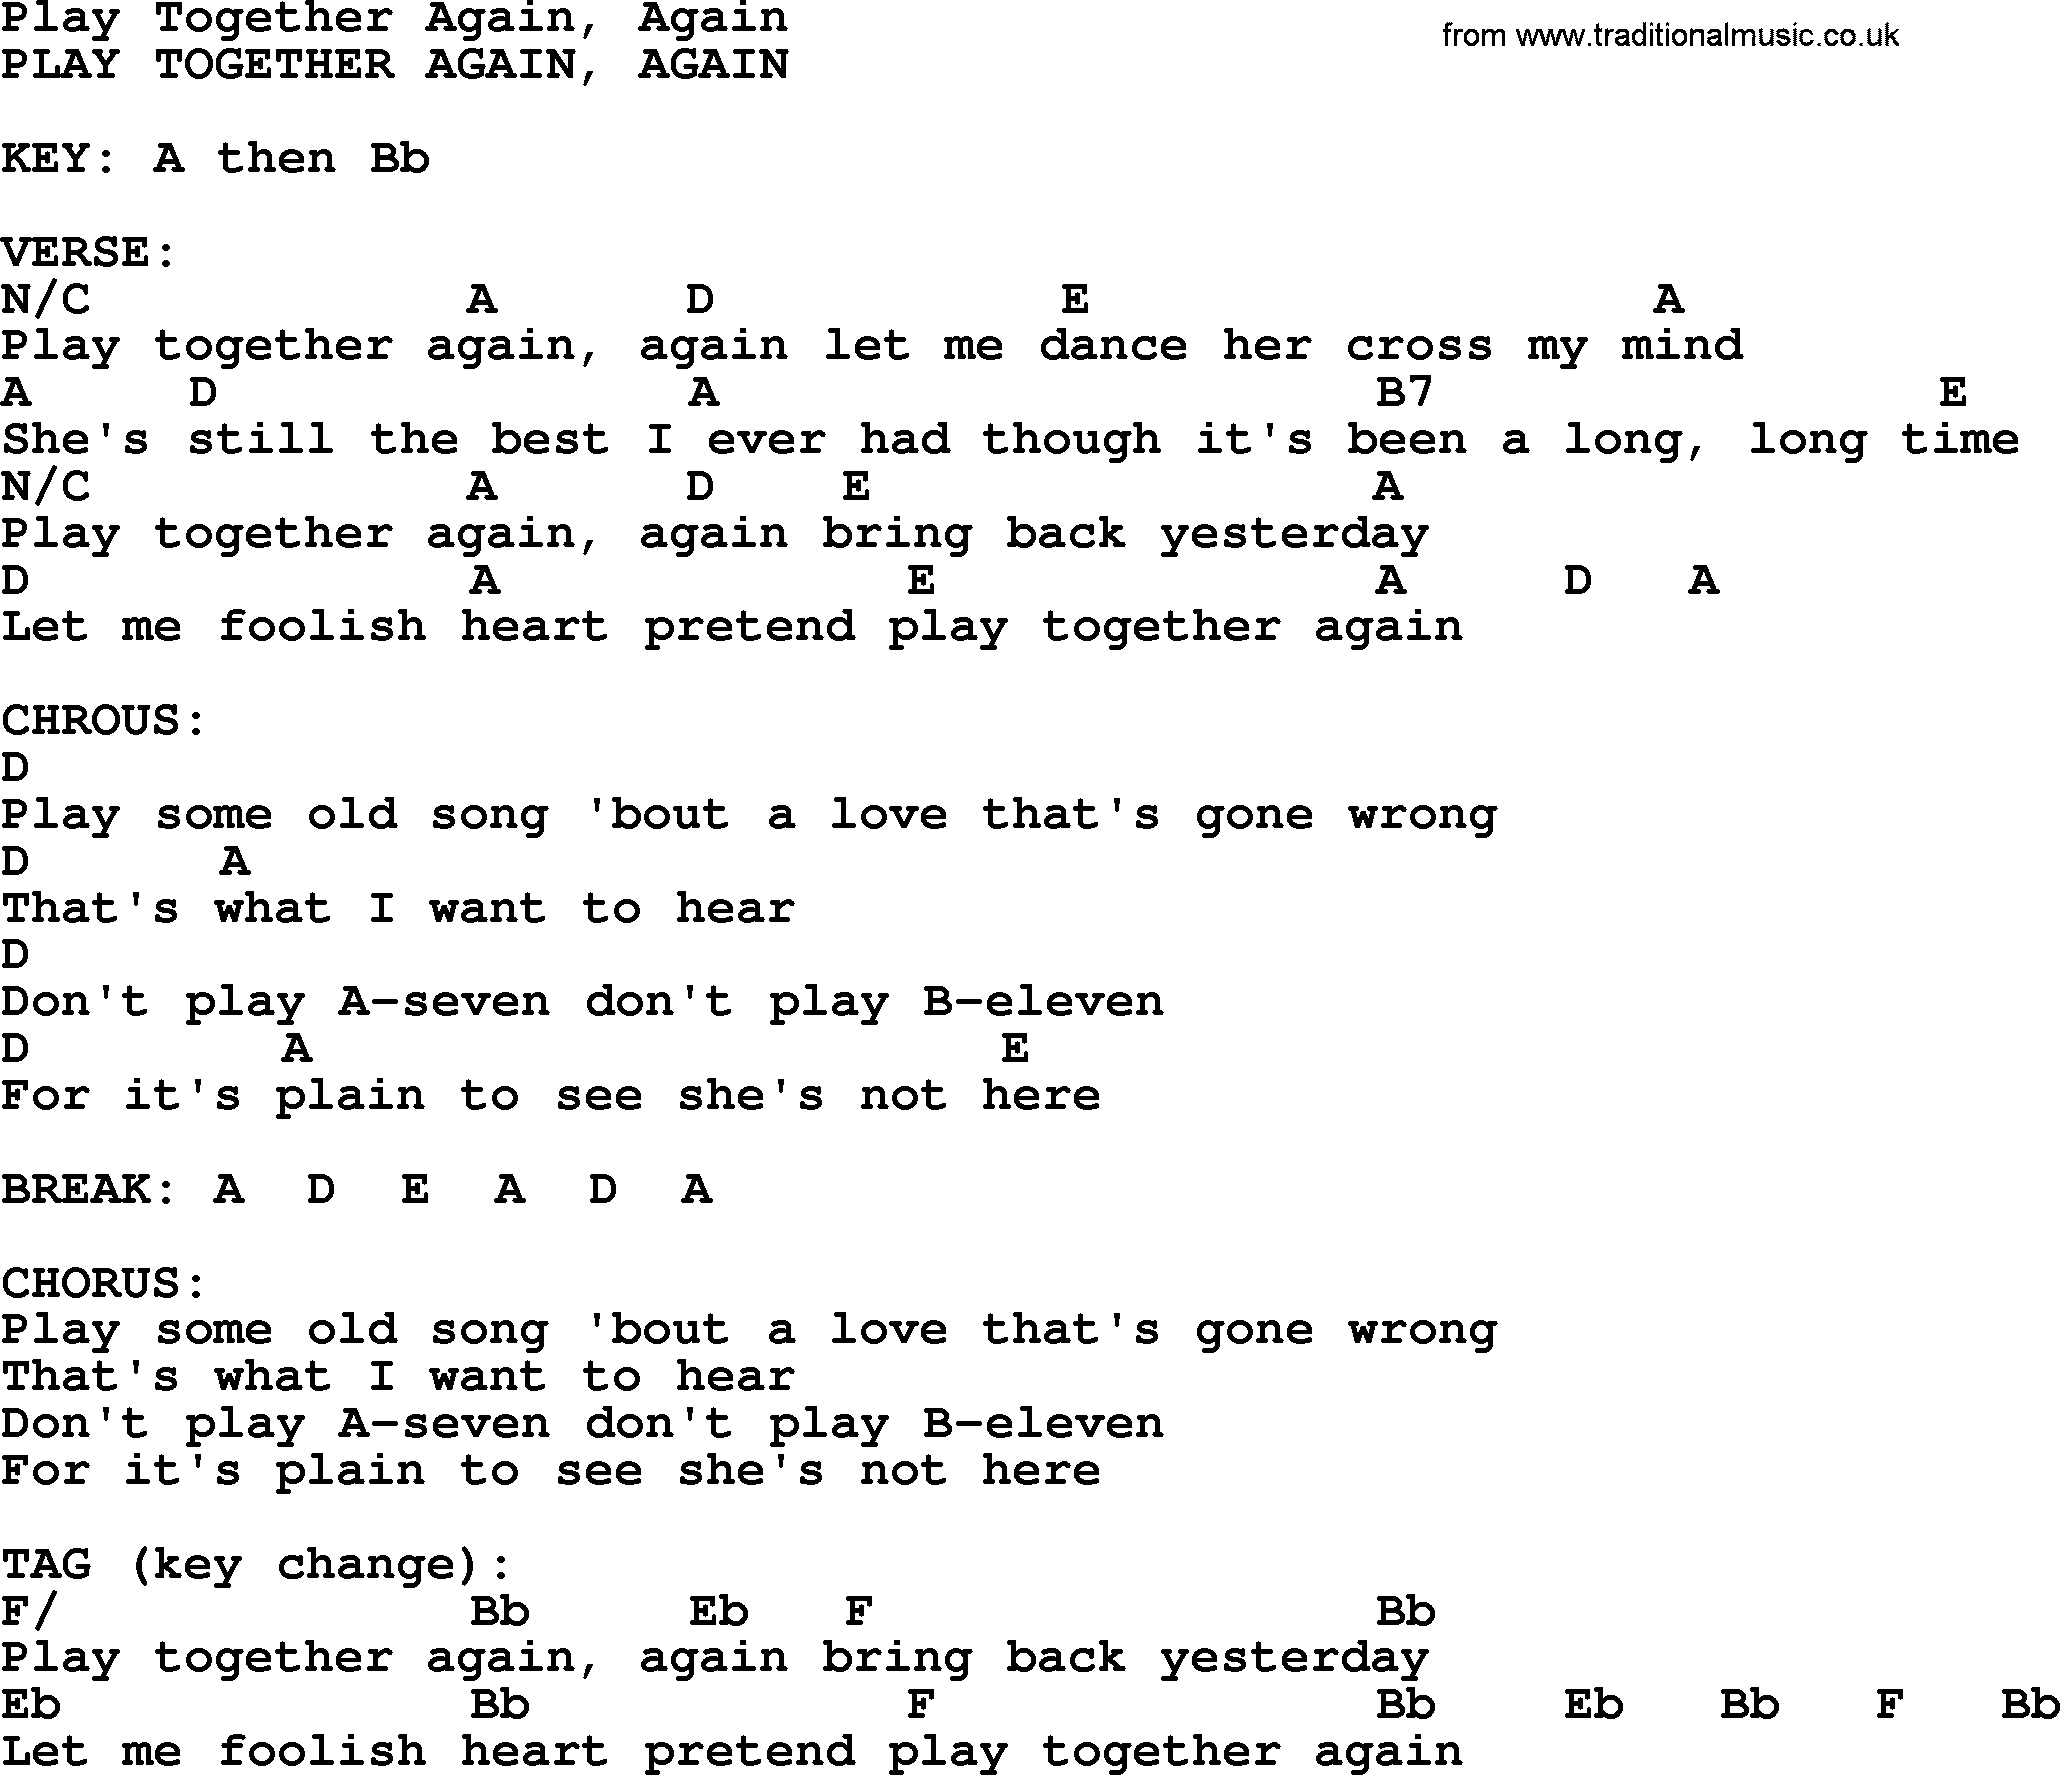 Bluegrass song: Play Together Again, Again, lyrics and chords